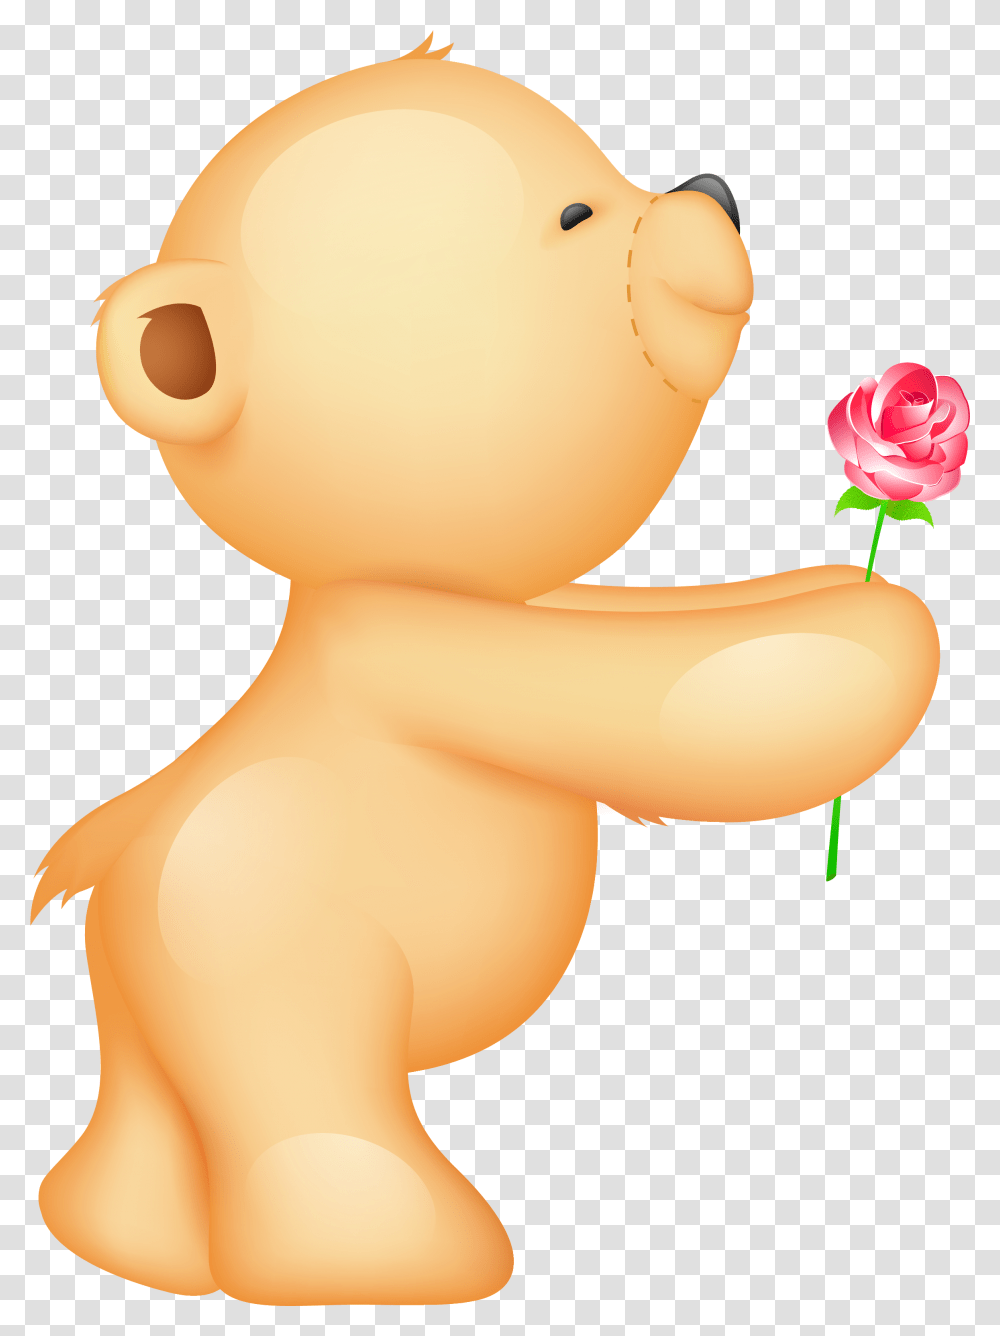 Cute Valentine Teddy With Rose Clipart Picture Teddy Bear Holding Flowers, Plant, Toy, Blossom, Snowman Transparent Png